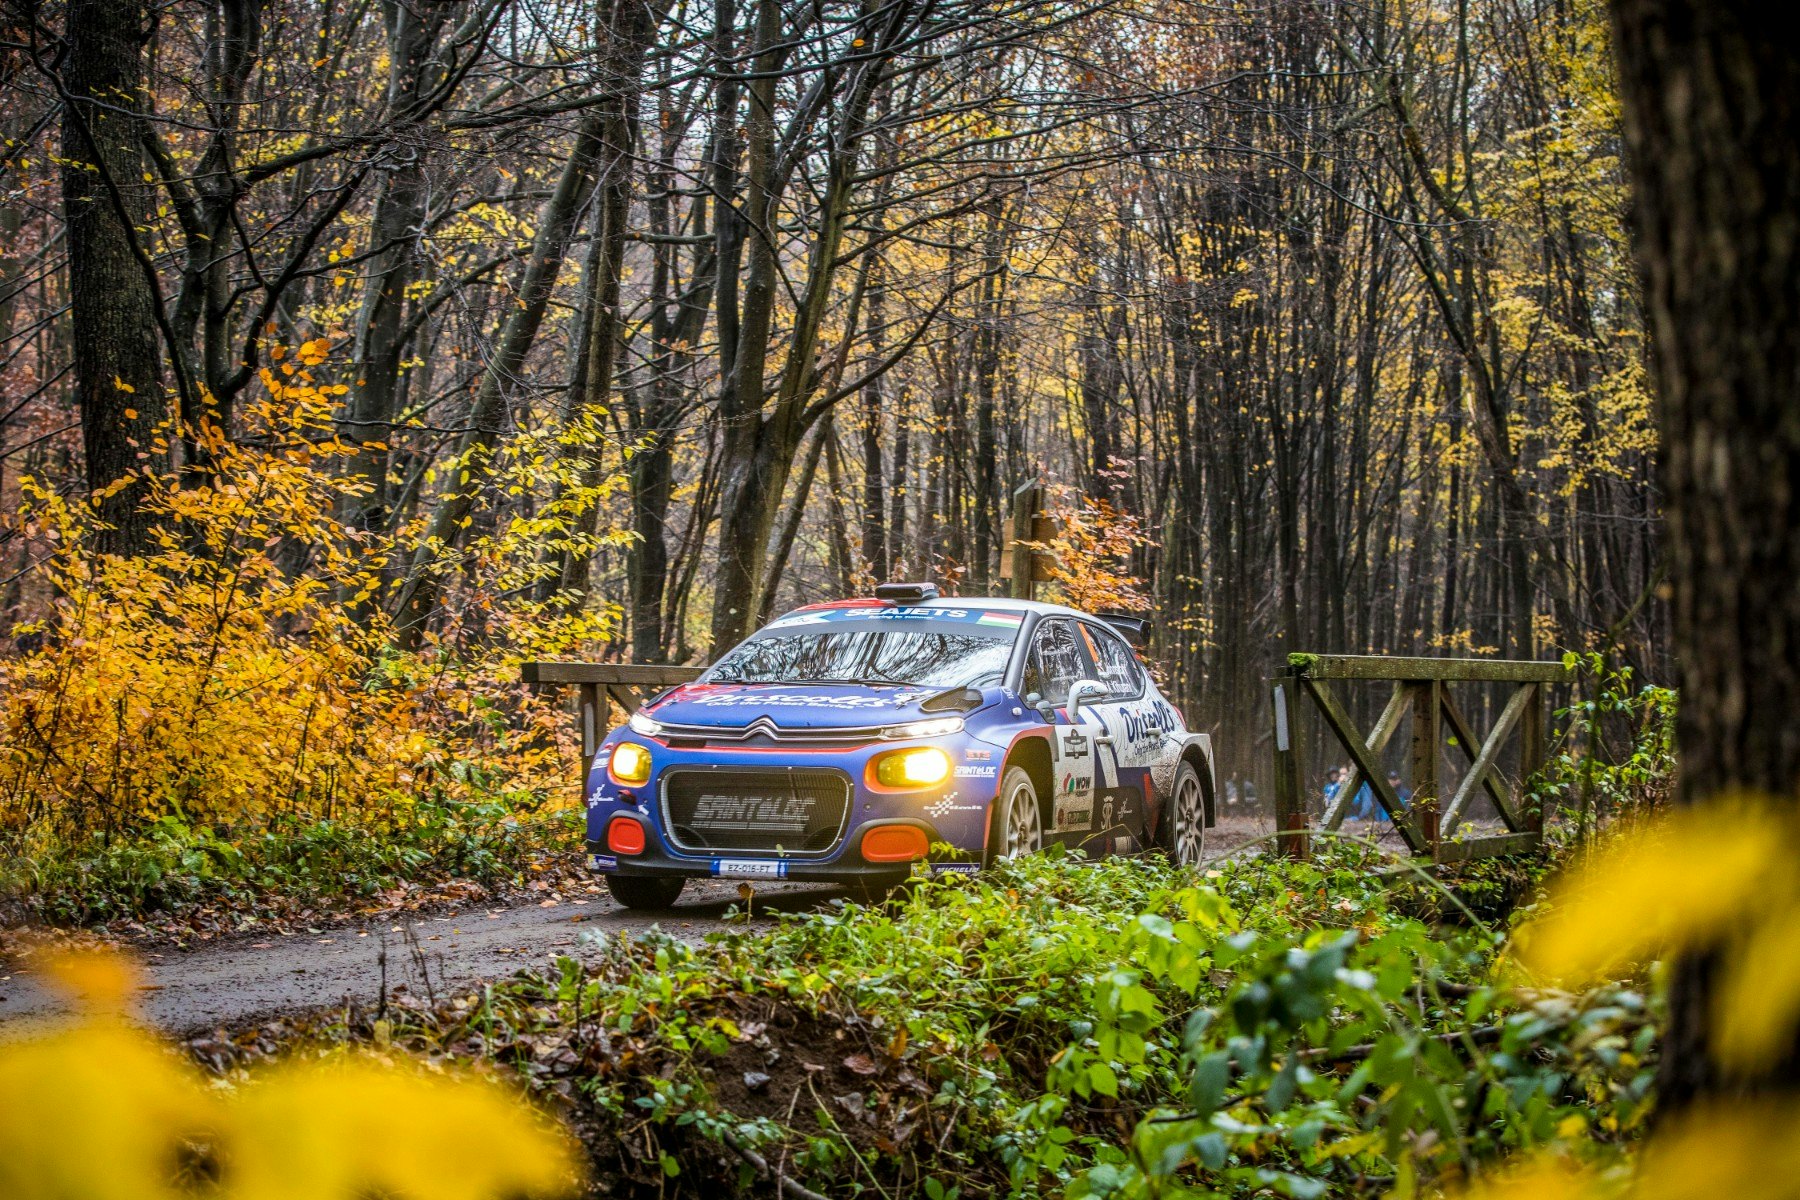 The American rally pairing eyeing up life in the WRC – DirtFish